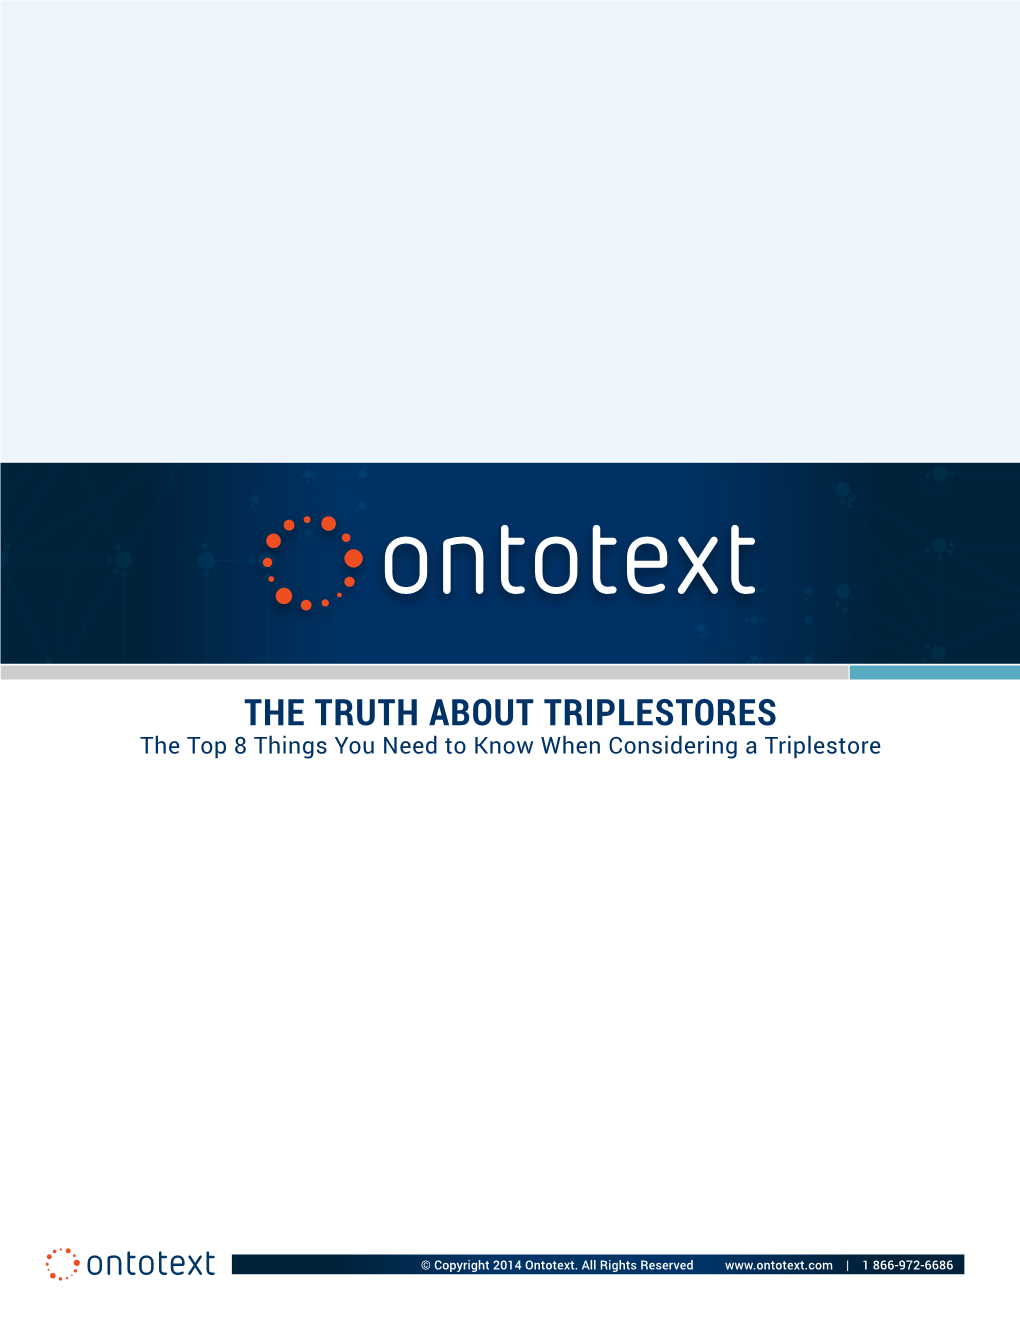 THE TRUTH ABOUT TRIPLESTORES the Top 8 Things You Need to Know When Considering a Triplestore